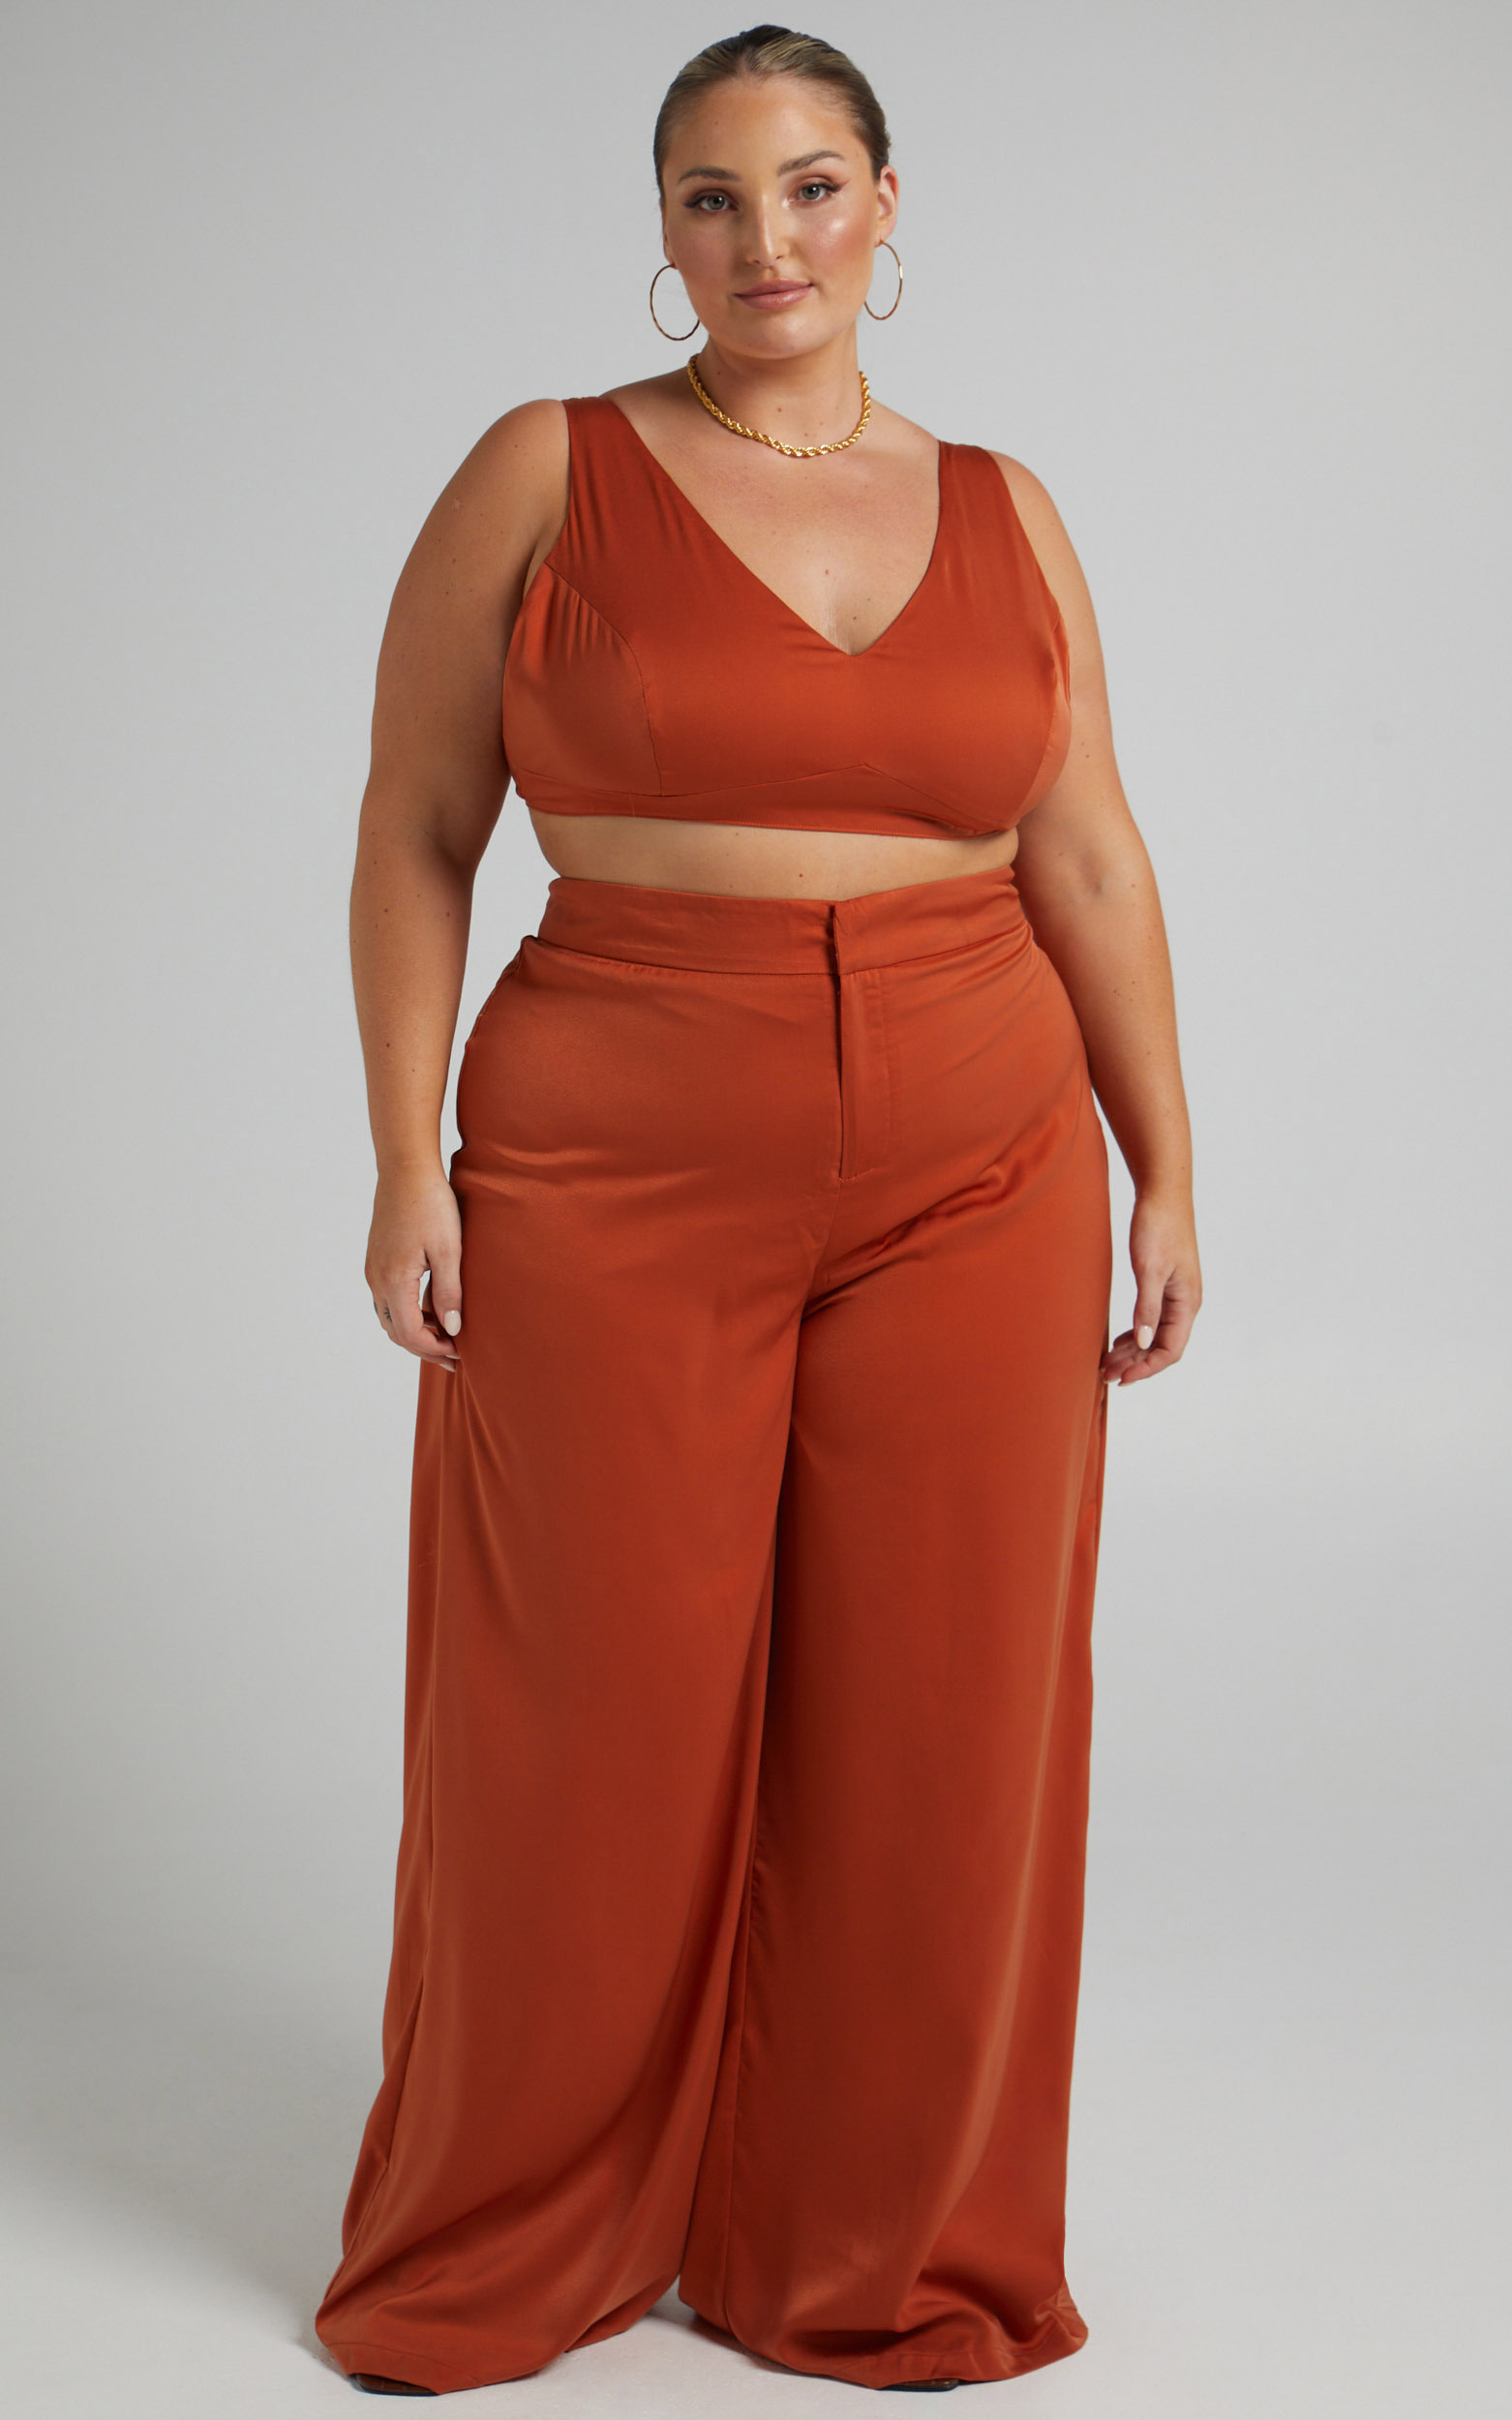 Alexandra Two Piece Pant Set in Rust Satin - 06, BRN1, hi-res image number null